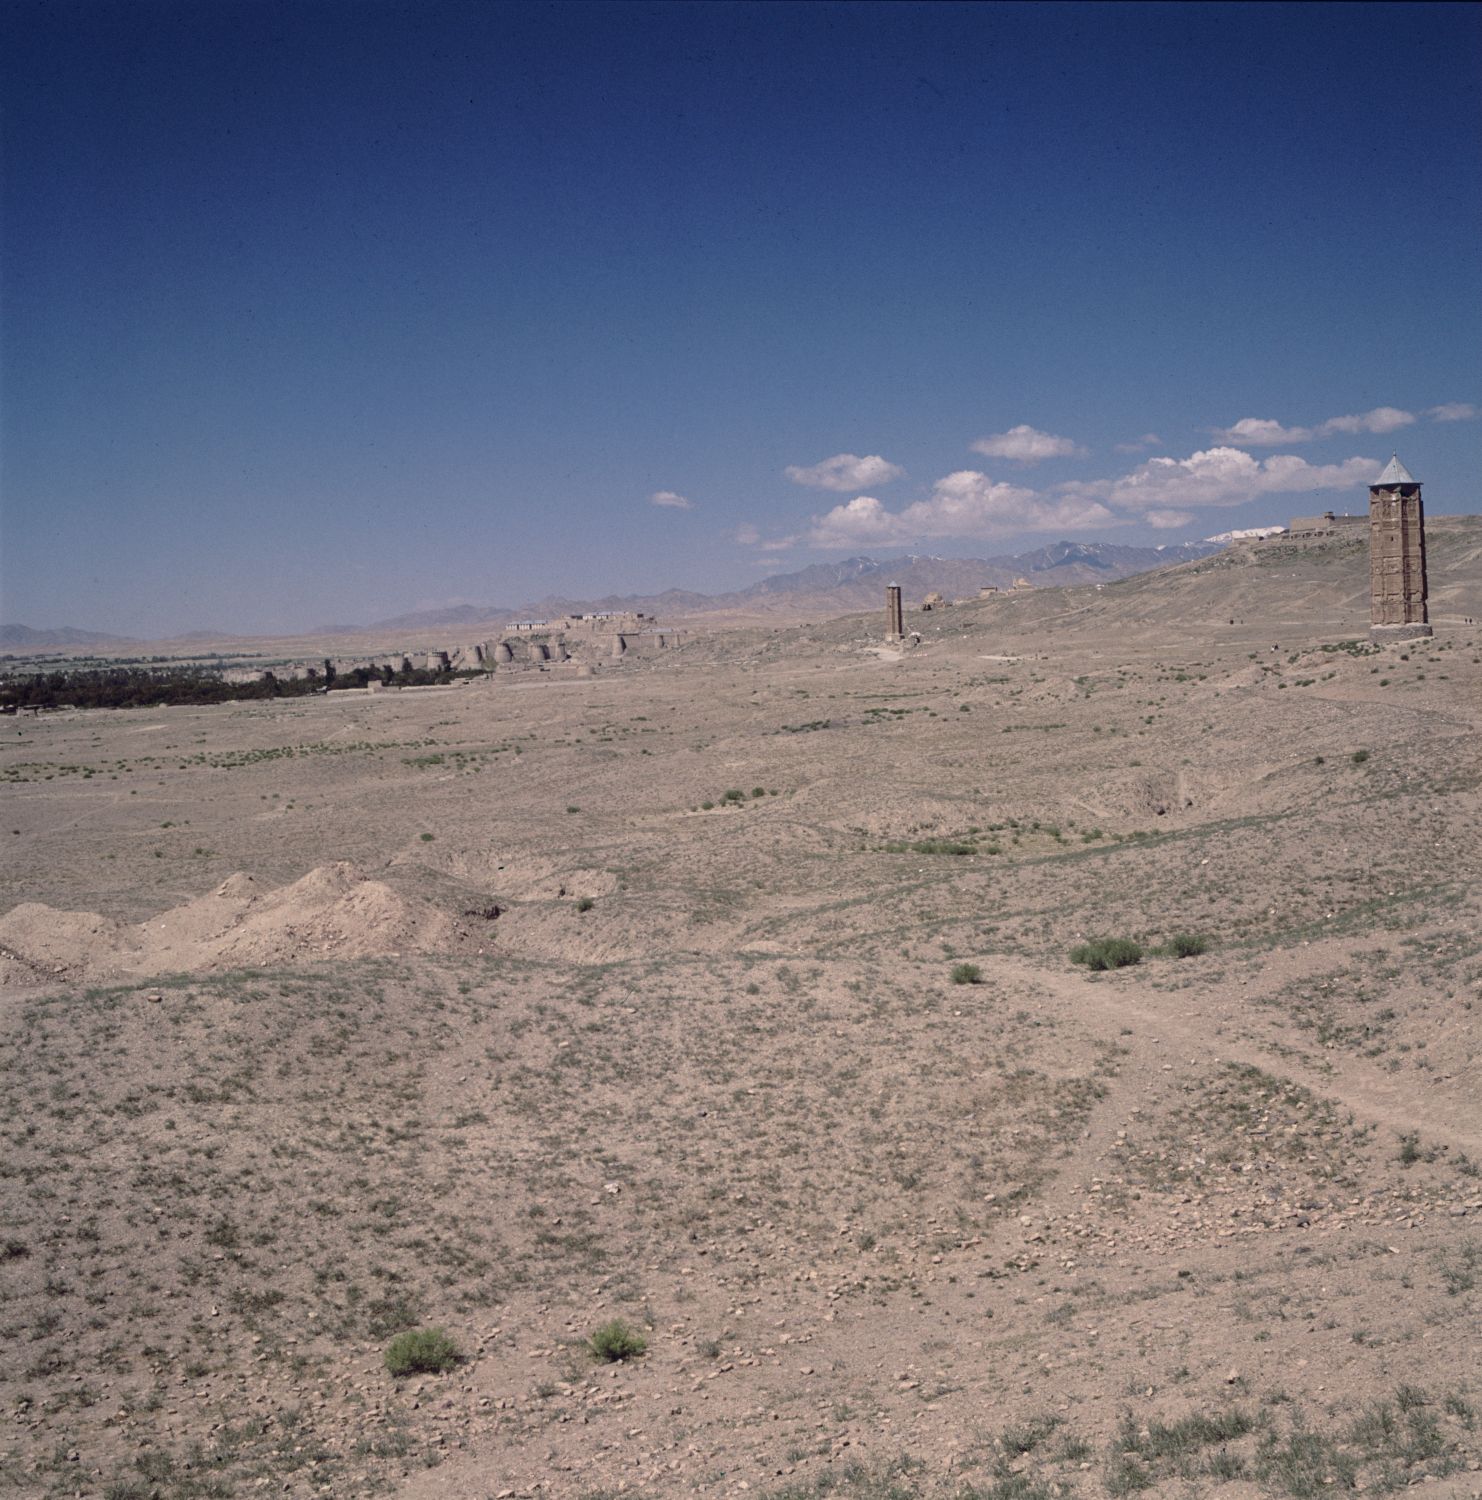 General view of minarets of Ghazni facing northwest. Citadel is visible in background.